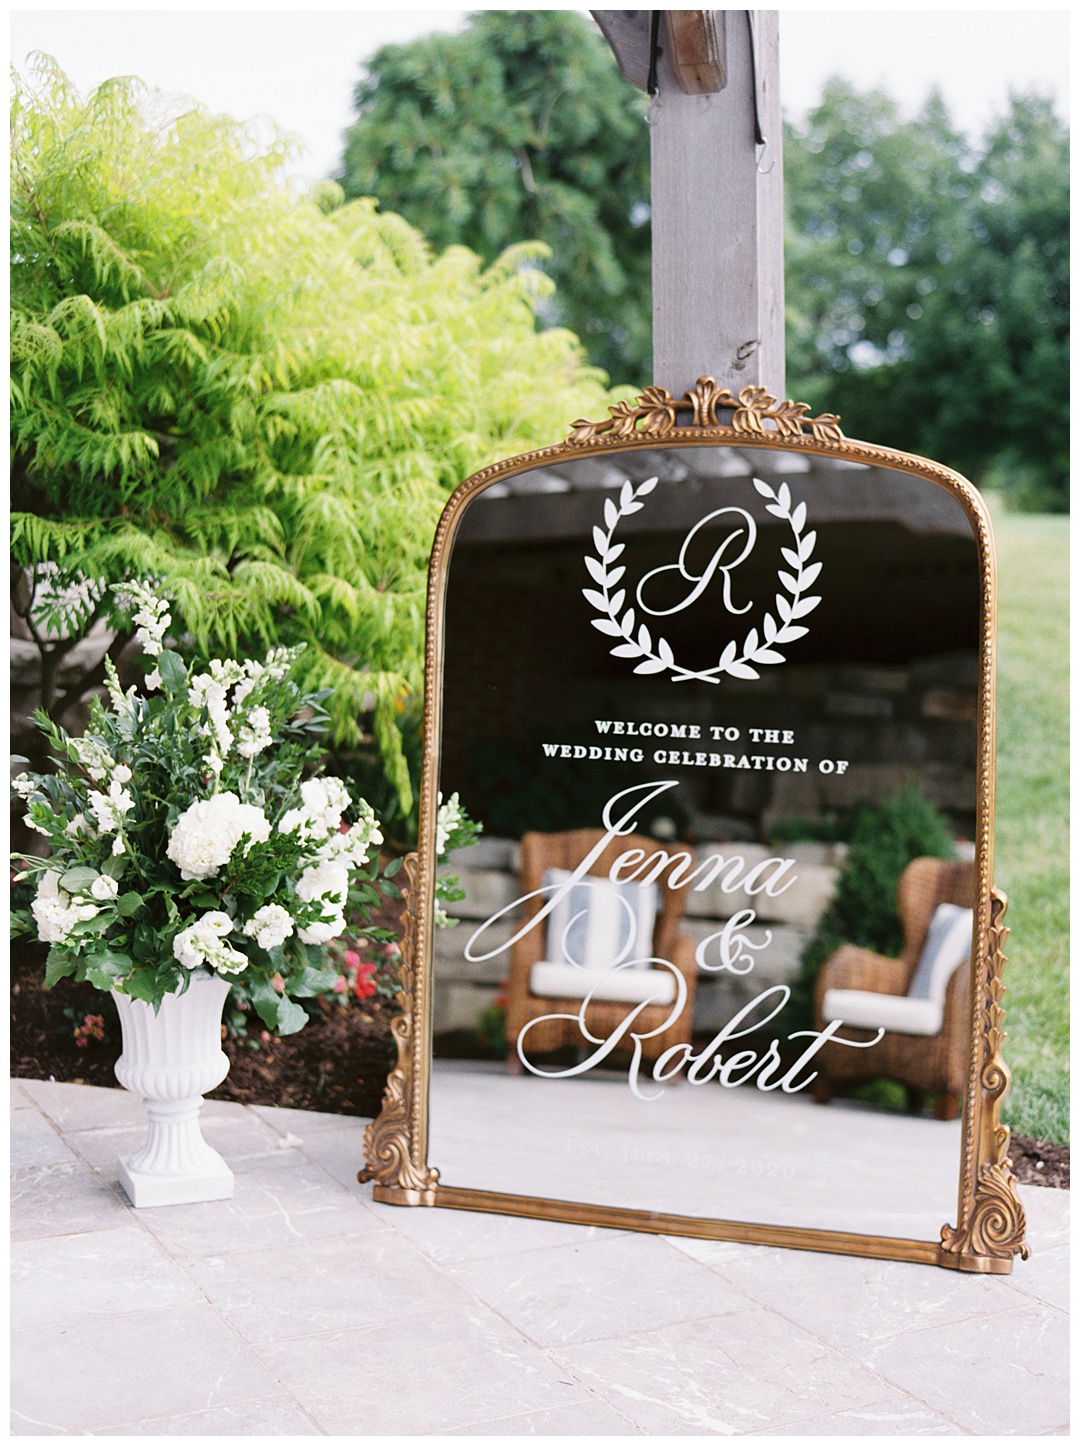 Anthropologie Mirror Lush Backyard Wedding on Film Featured on Magnolia Rouge with Sarah Sunstrom Photography